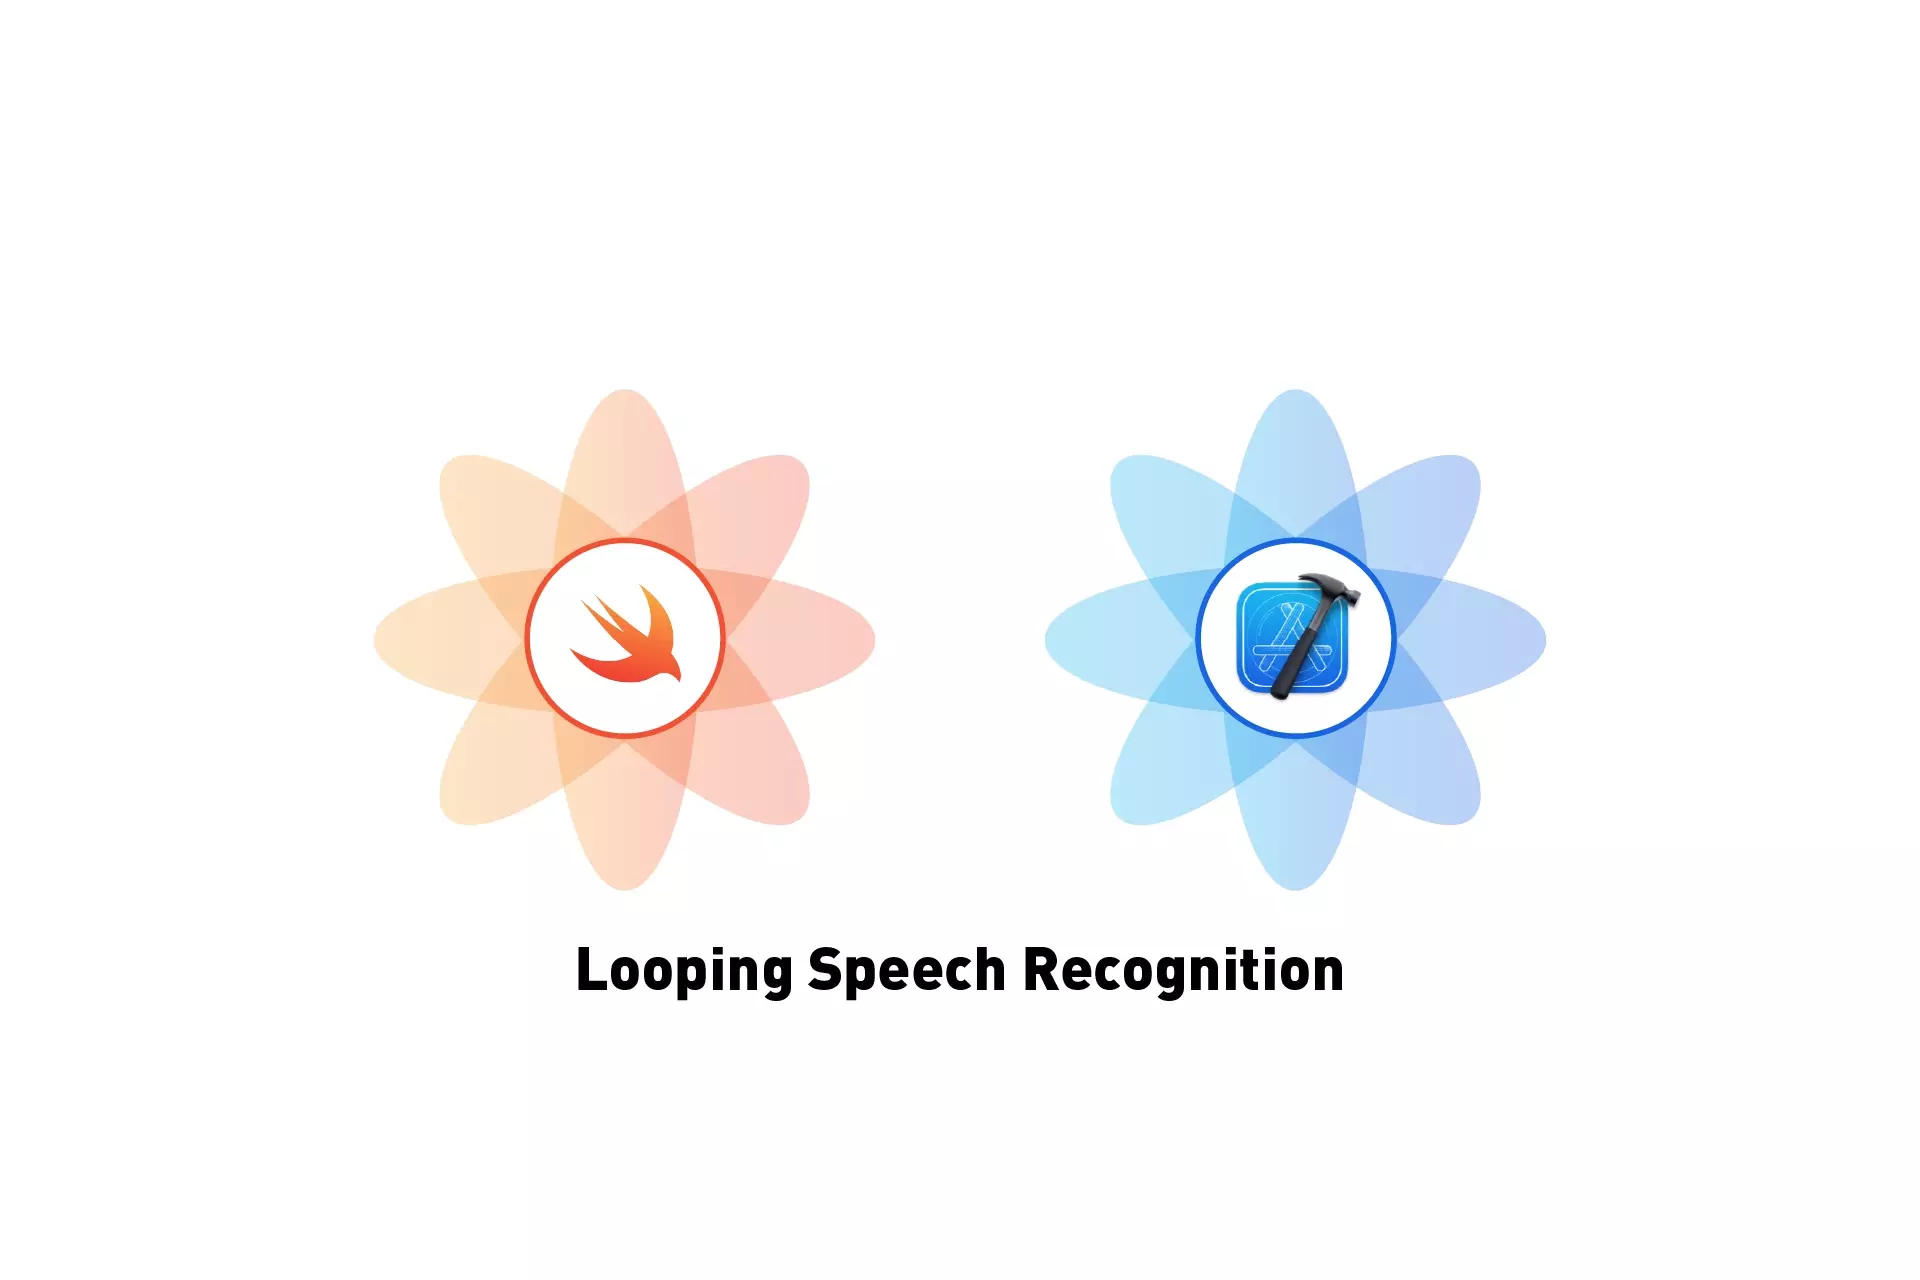 Two flowers that represent Swift and Xcode. Beneath them sits the text "Looping Speech Recognition."